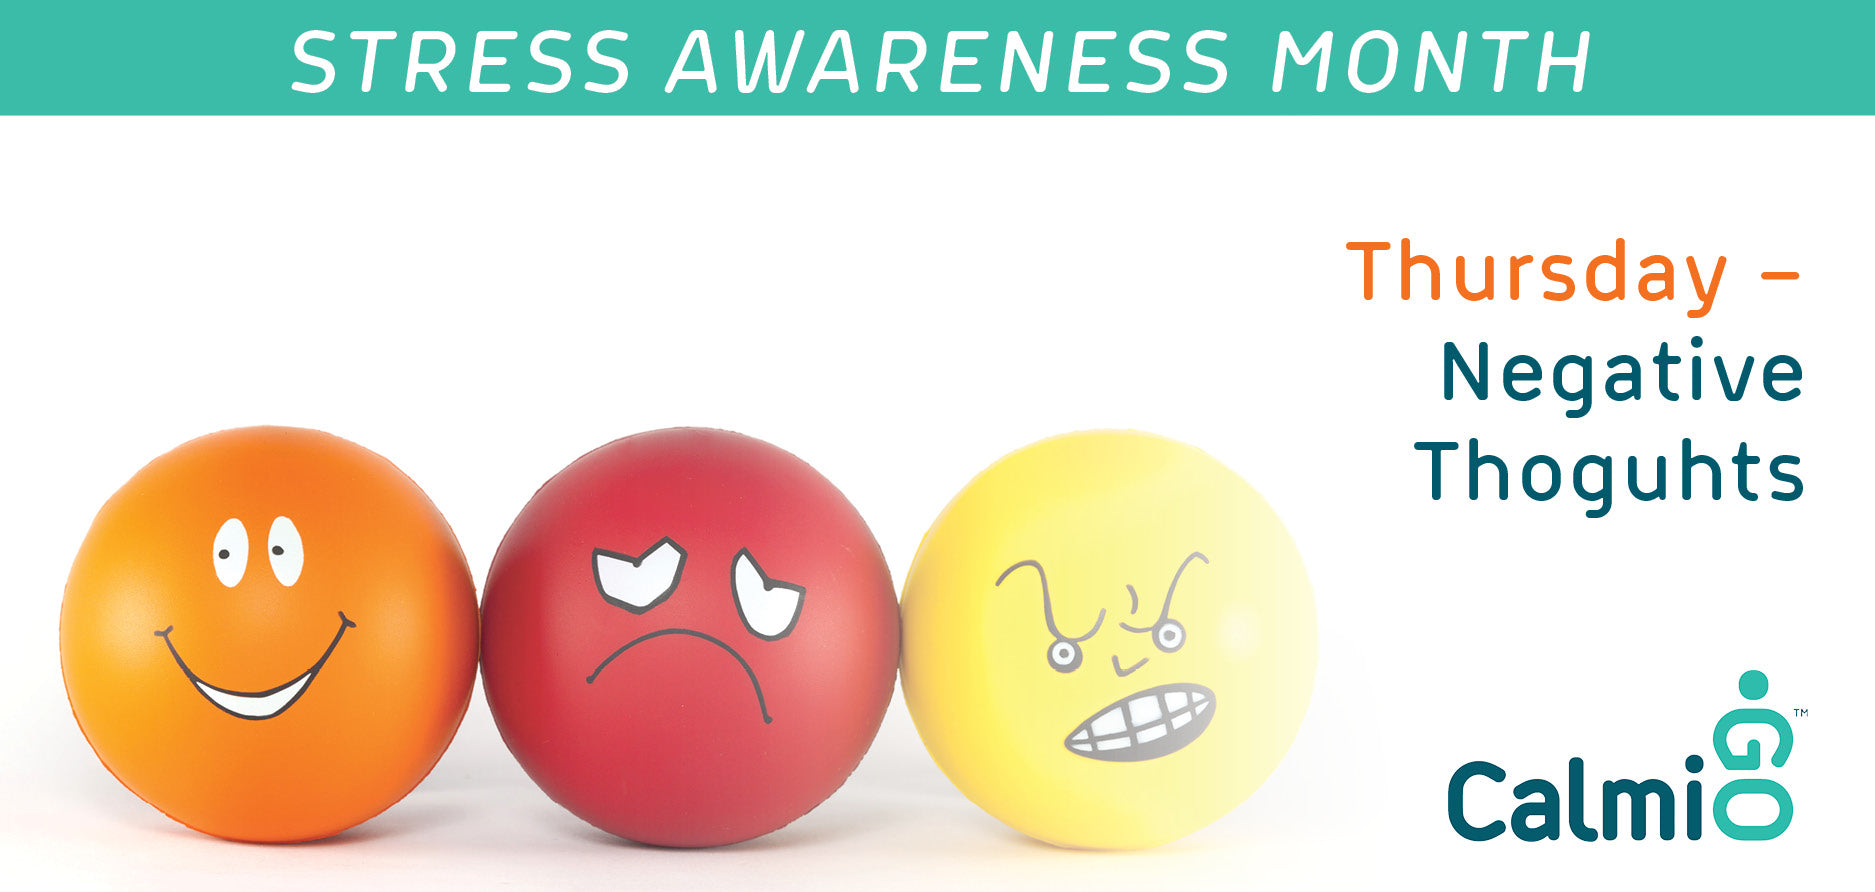 April 4 – Stress Awareness Month - Thursday Negative Thoughts and Stress